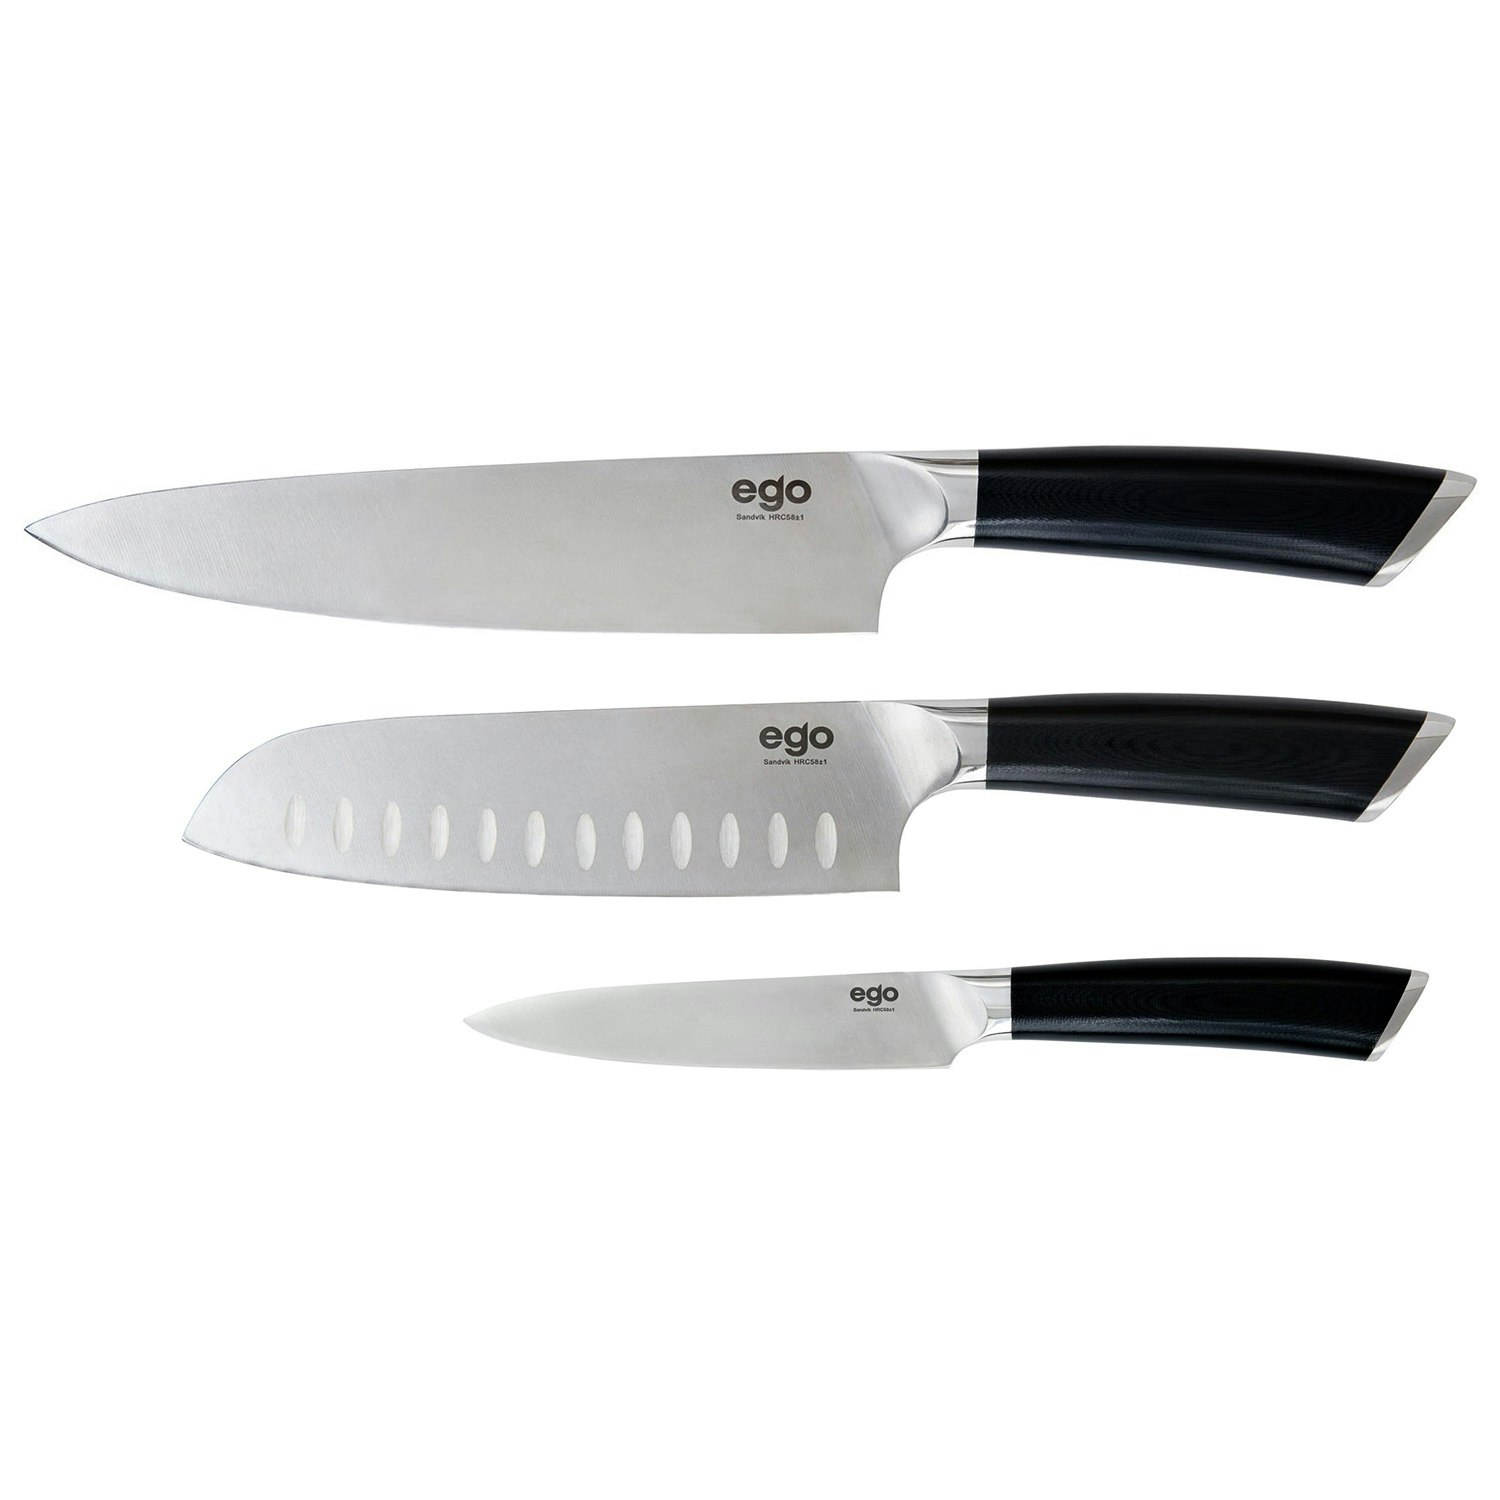 Set of 3 Chefs Knives with Magnetic Solid Wood Knife Block - Vollkommen FVR  - Made in Germany